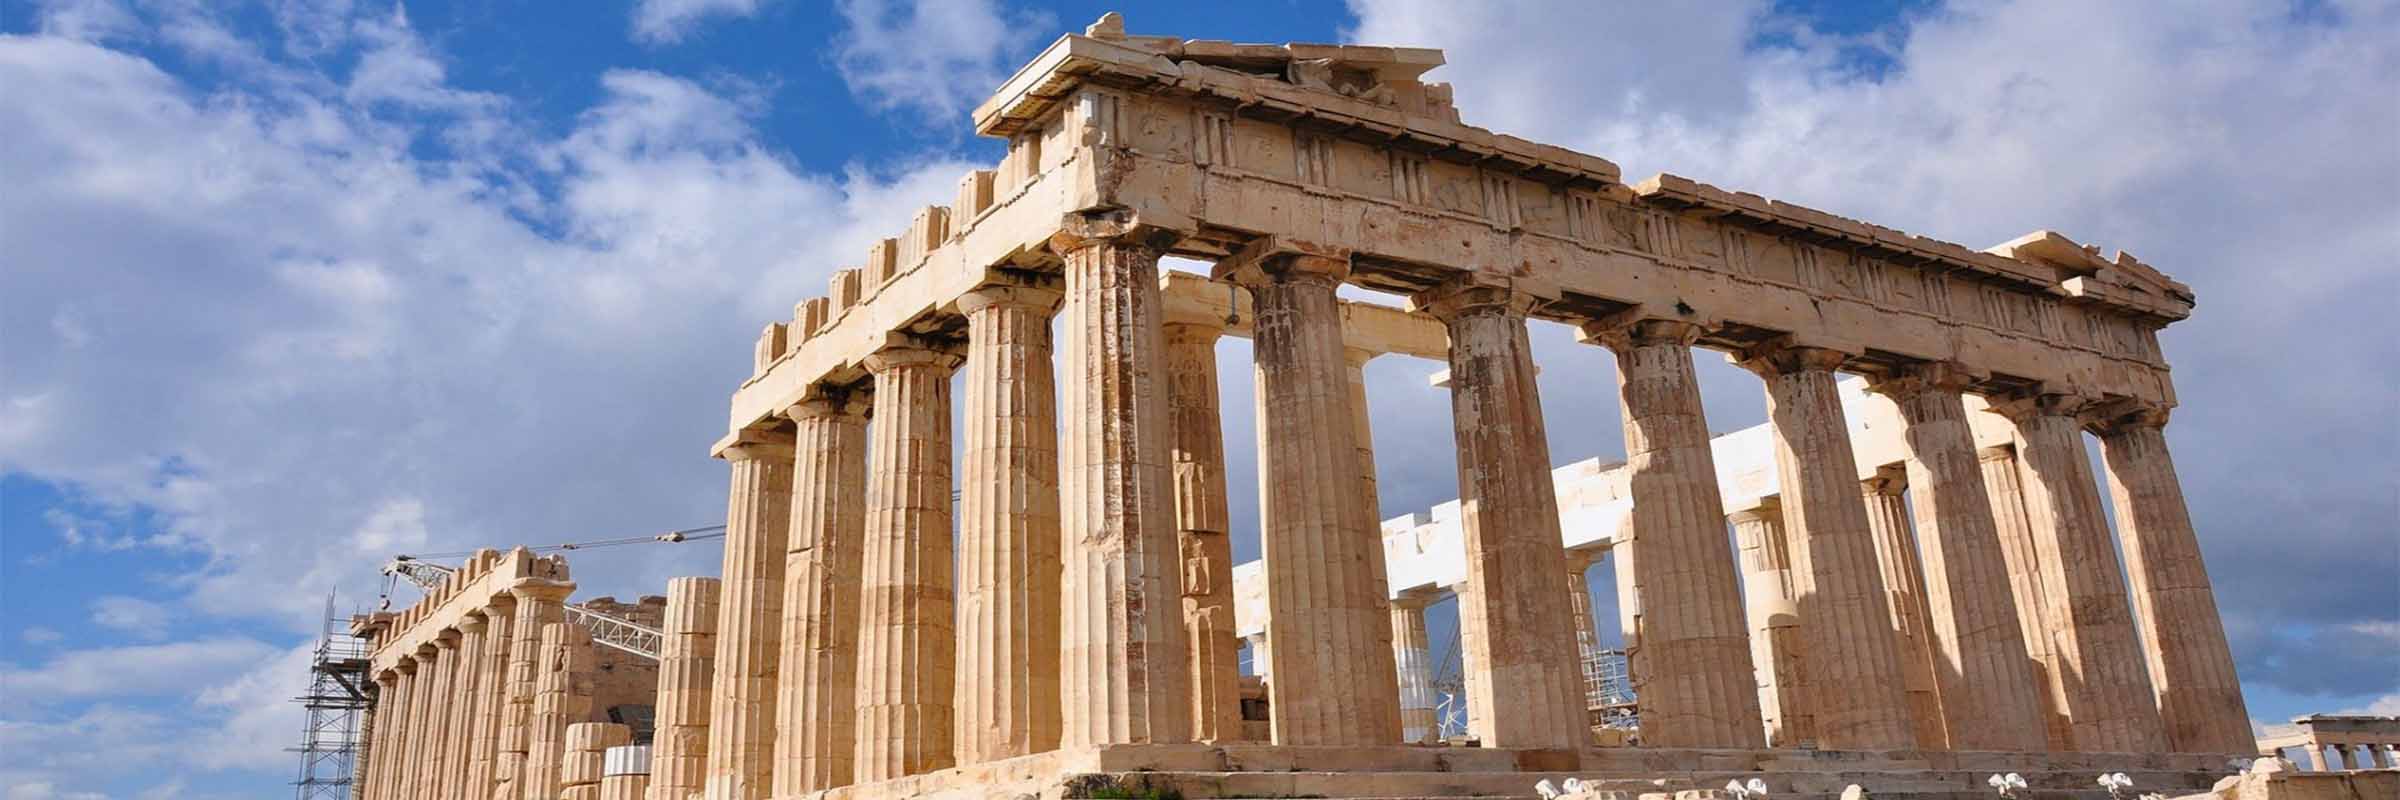 ATHENS-PRIVATE-TOURS-TRANSFERS-3